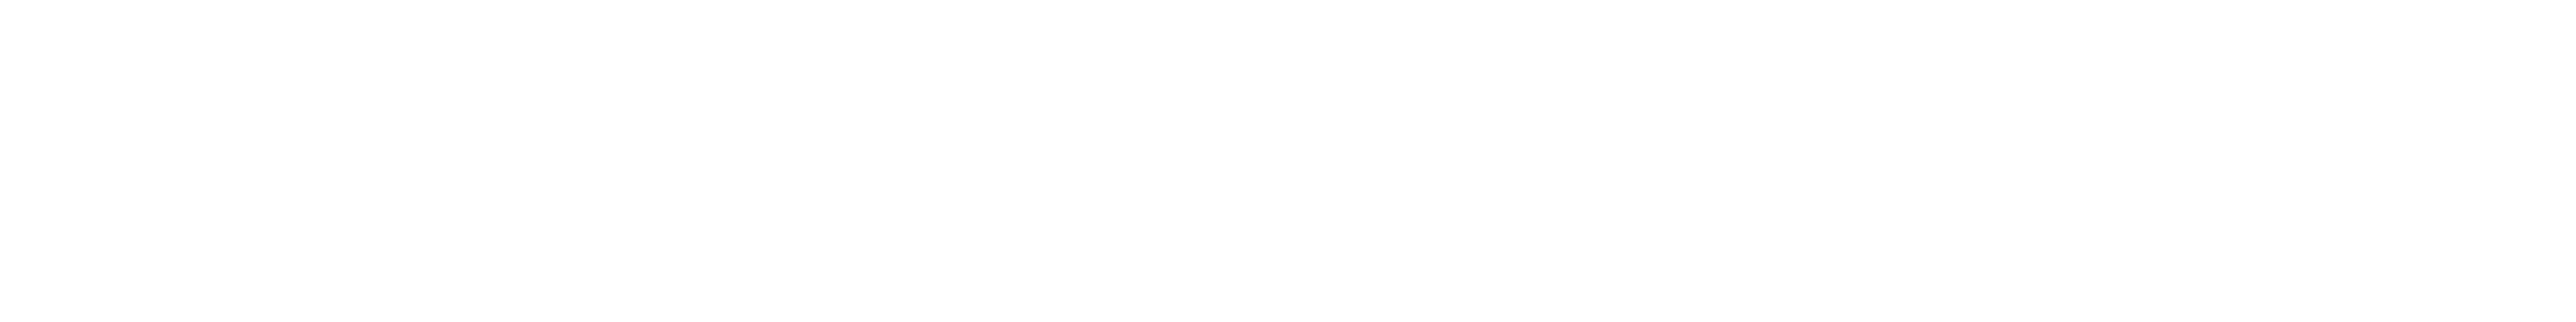  picture with wave to separate sections